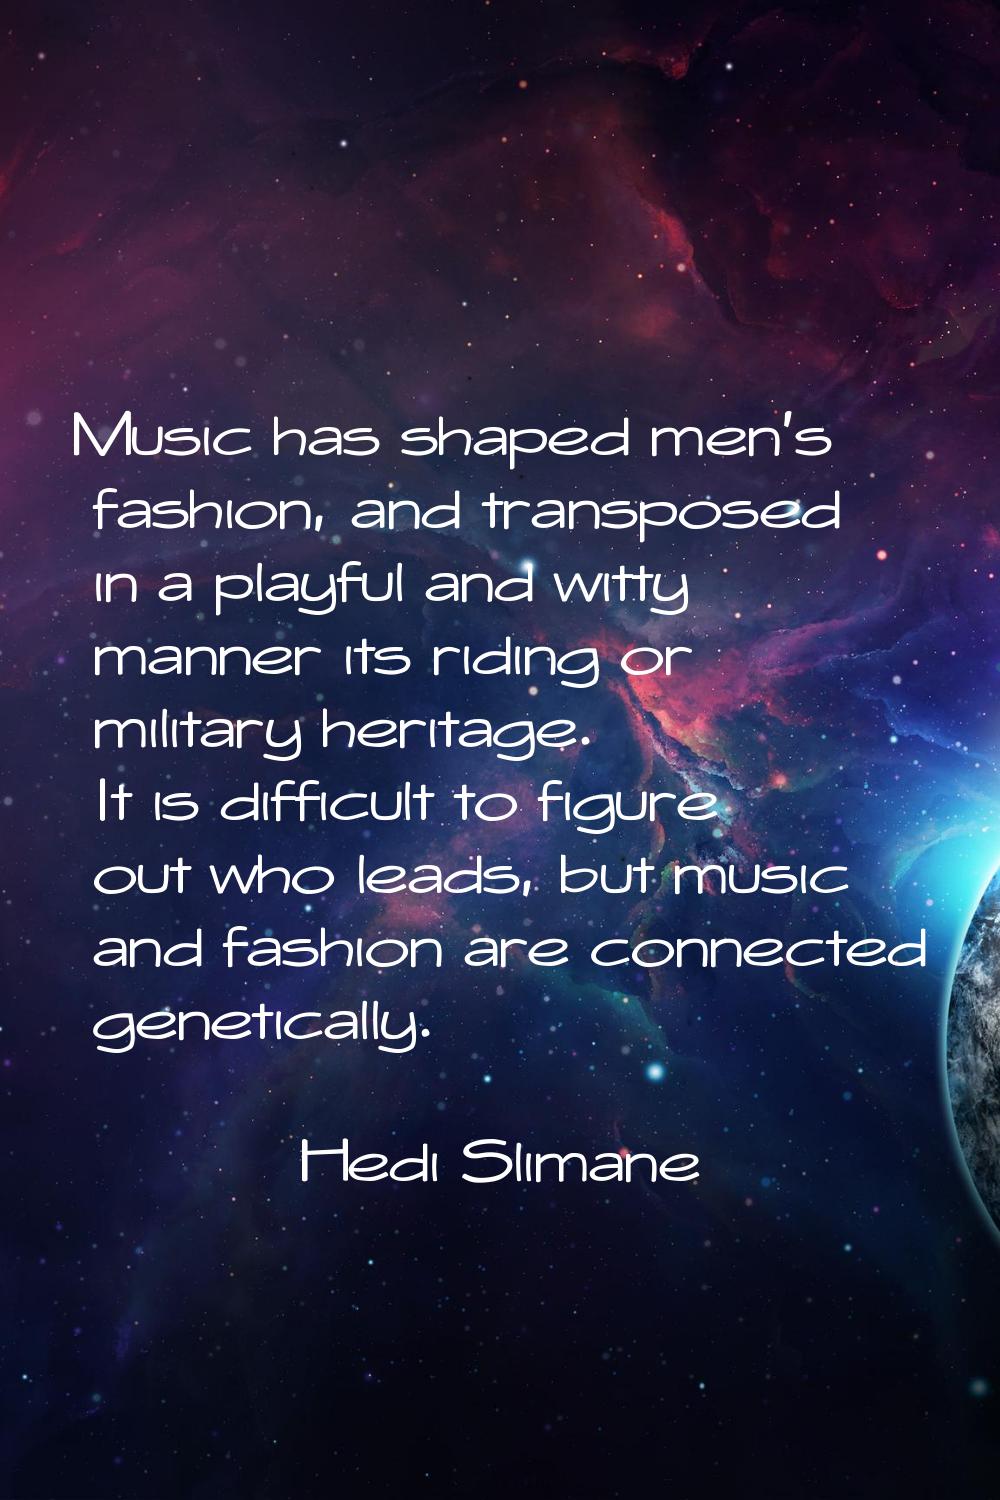 Music has shaped men's fashion, and transposed in a playful and witty manner its riding or military